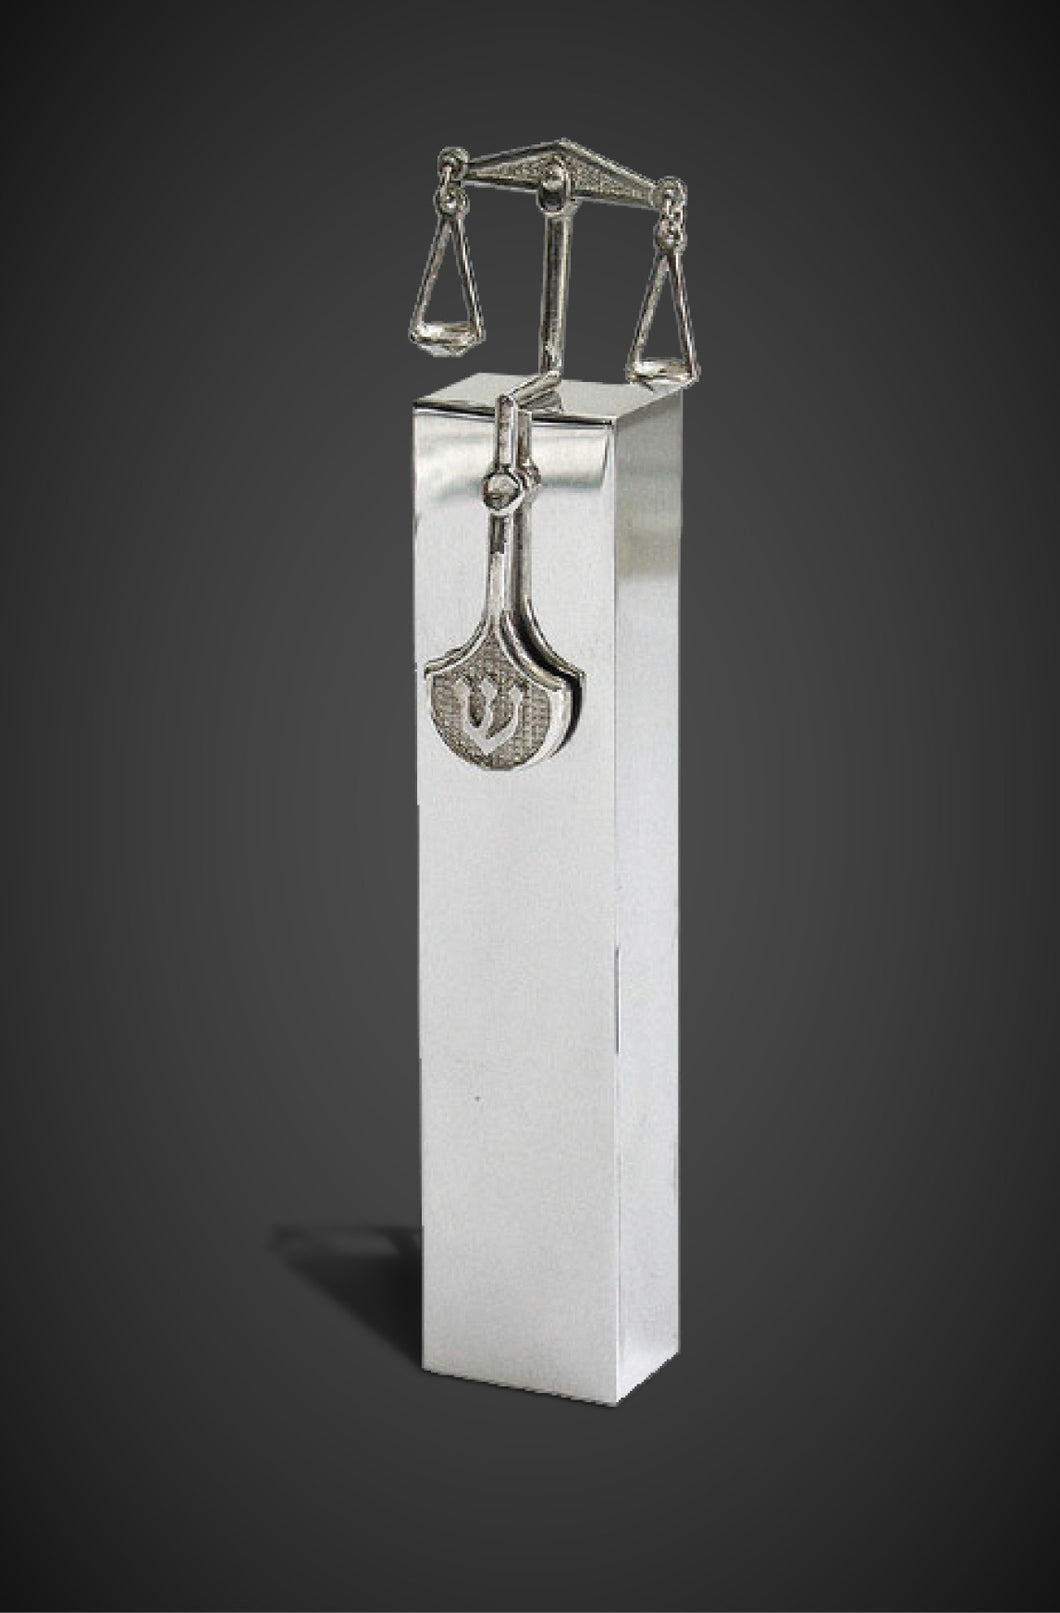 The Scales of Justice Mezuzah